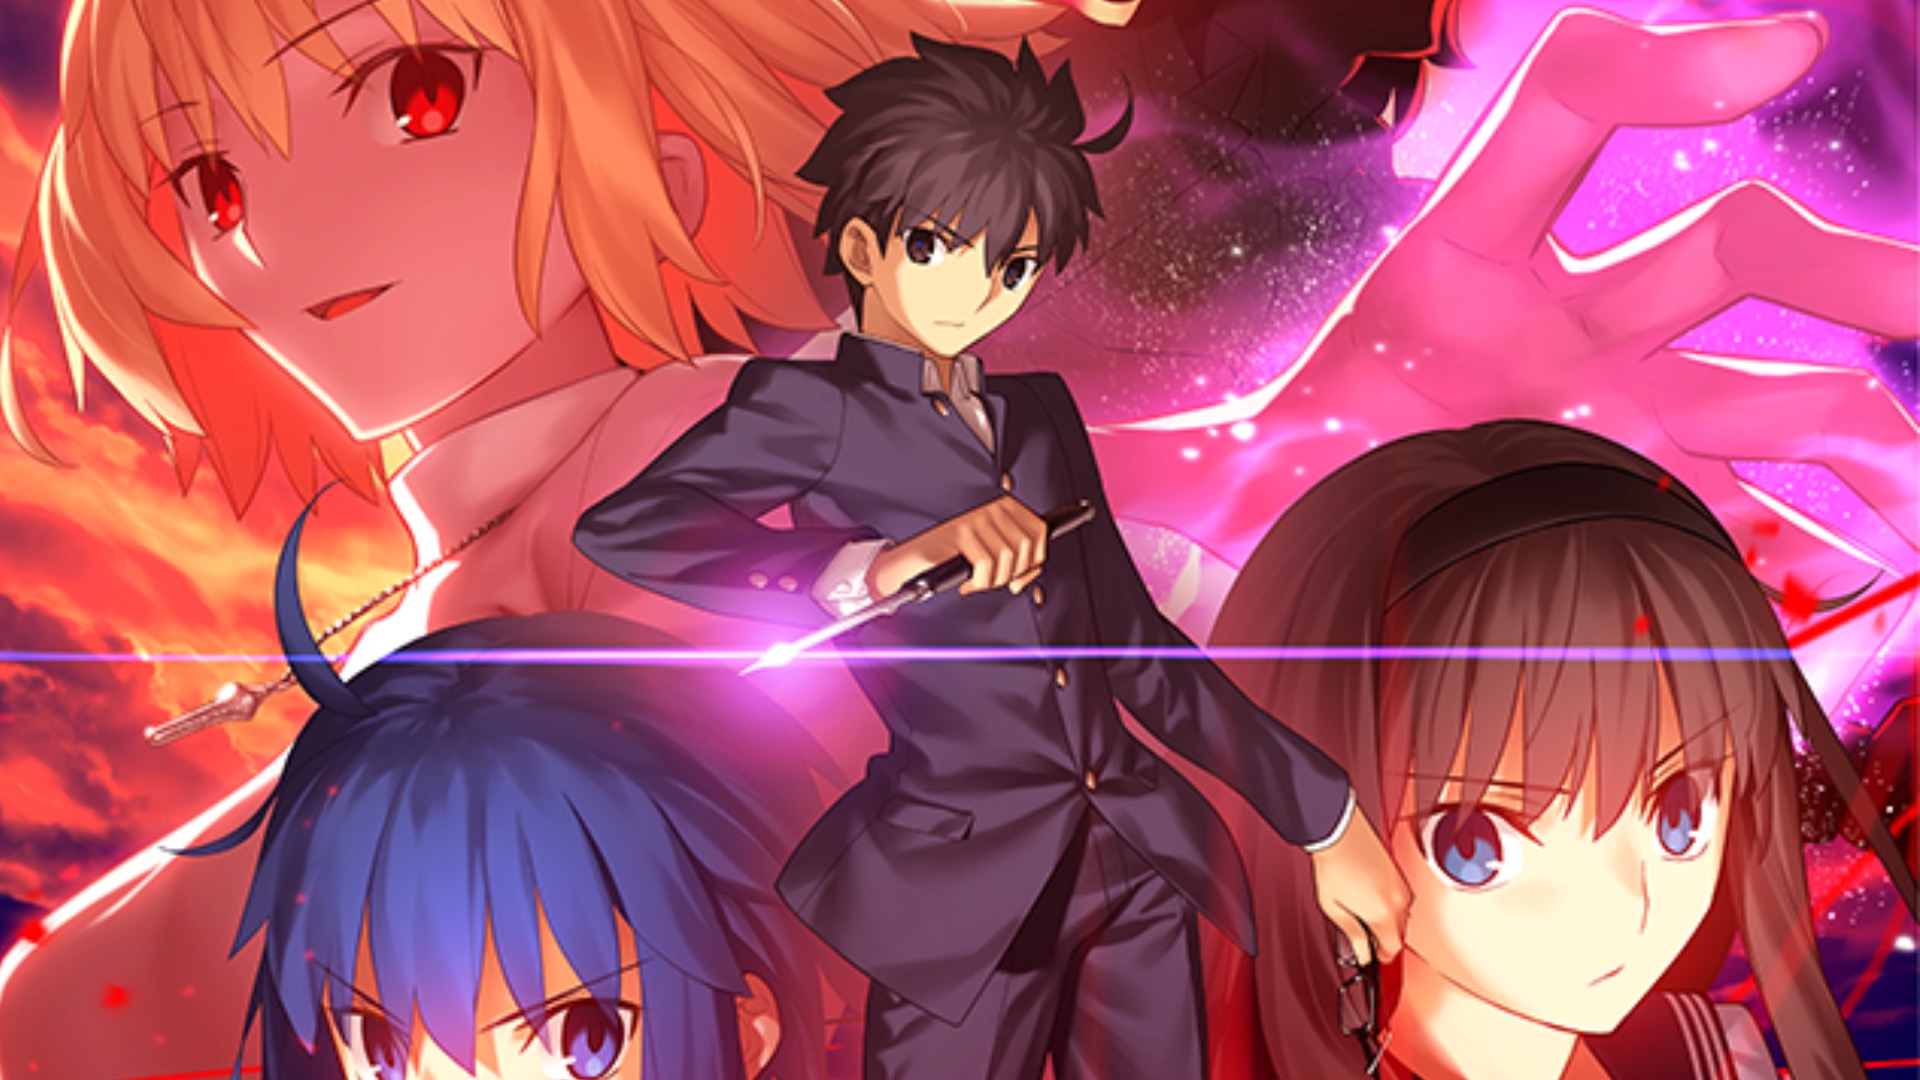 Melty Blood: Type Lumina Release Date Announced, Digital-Only and 